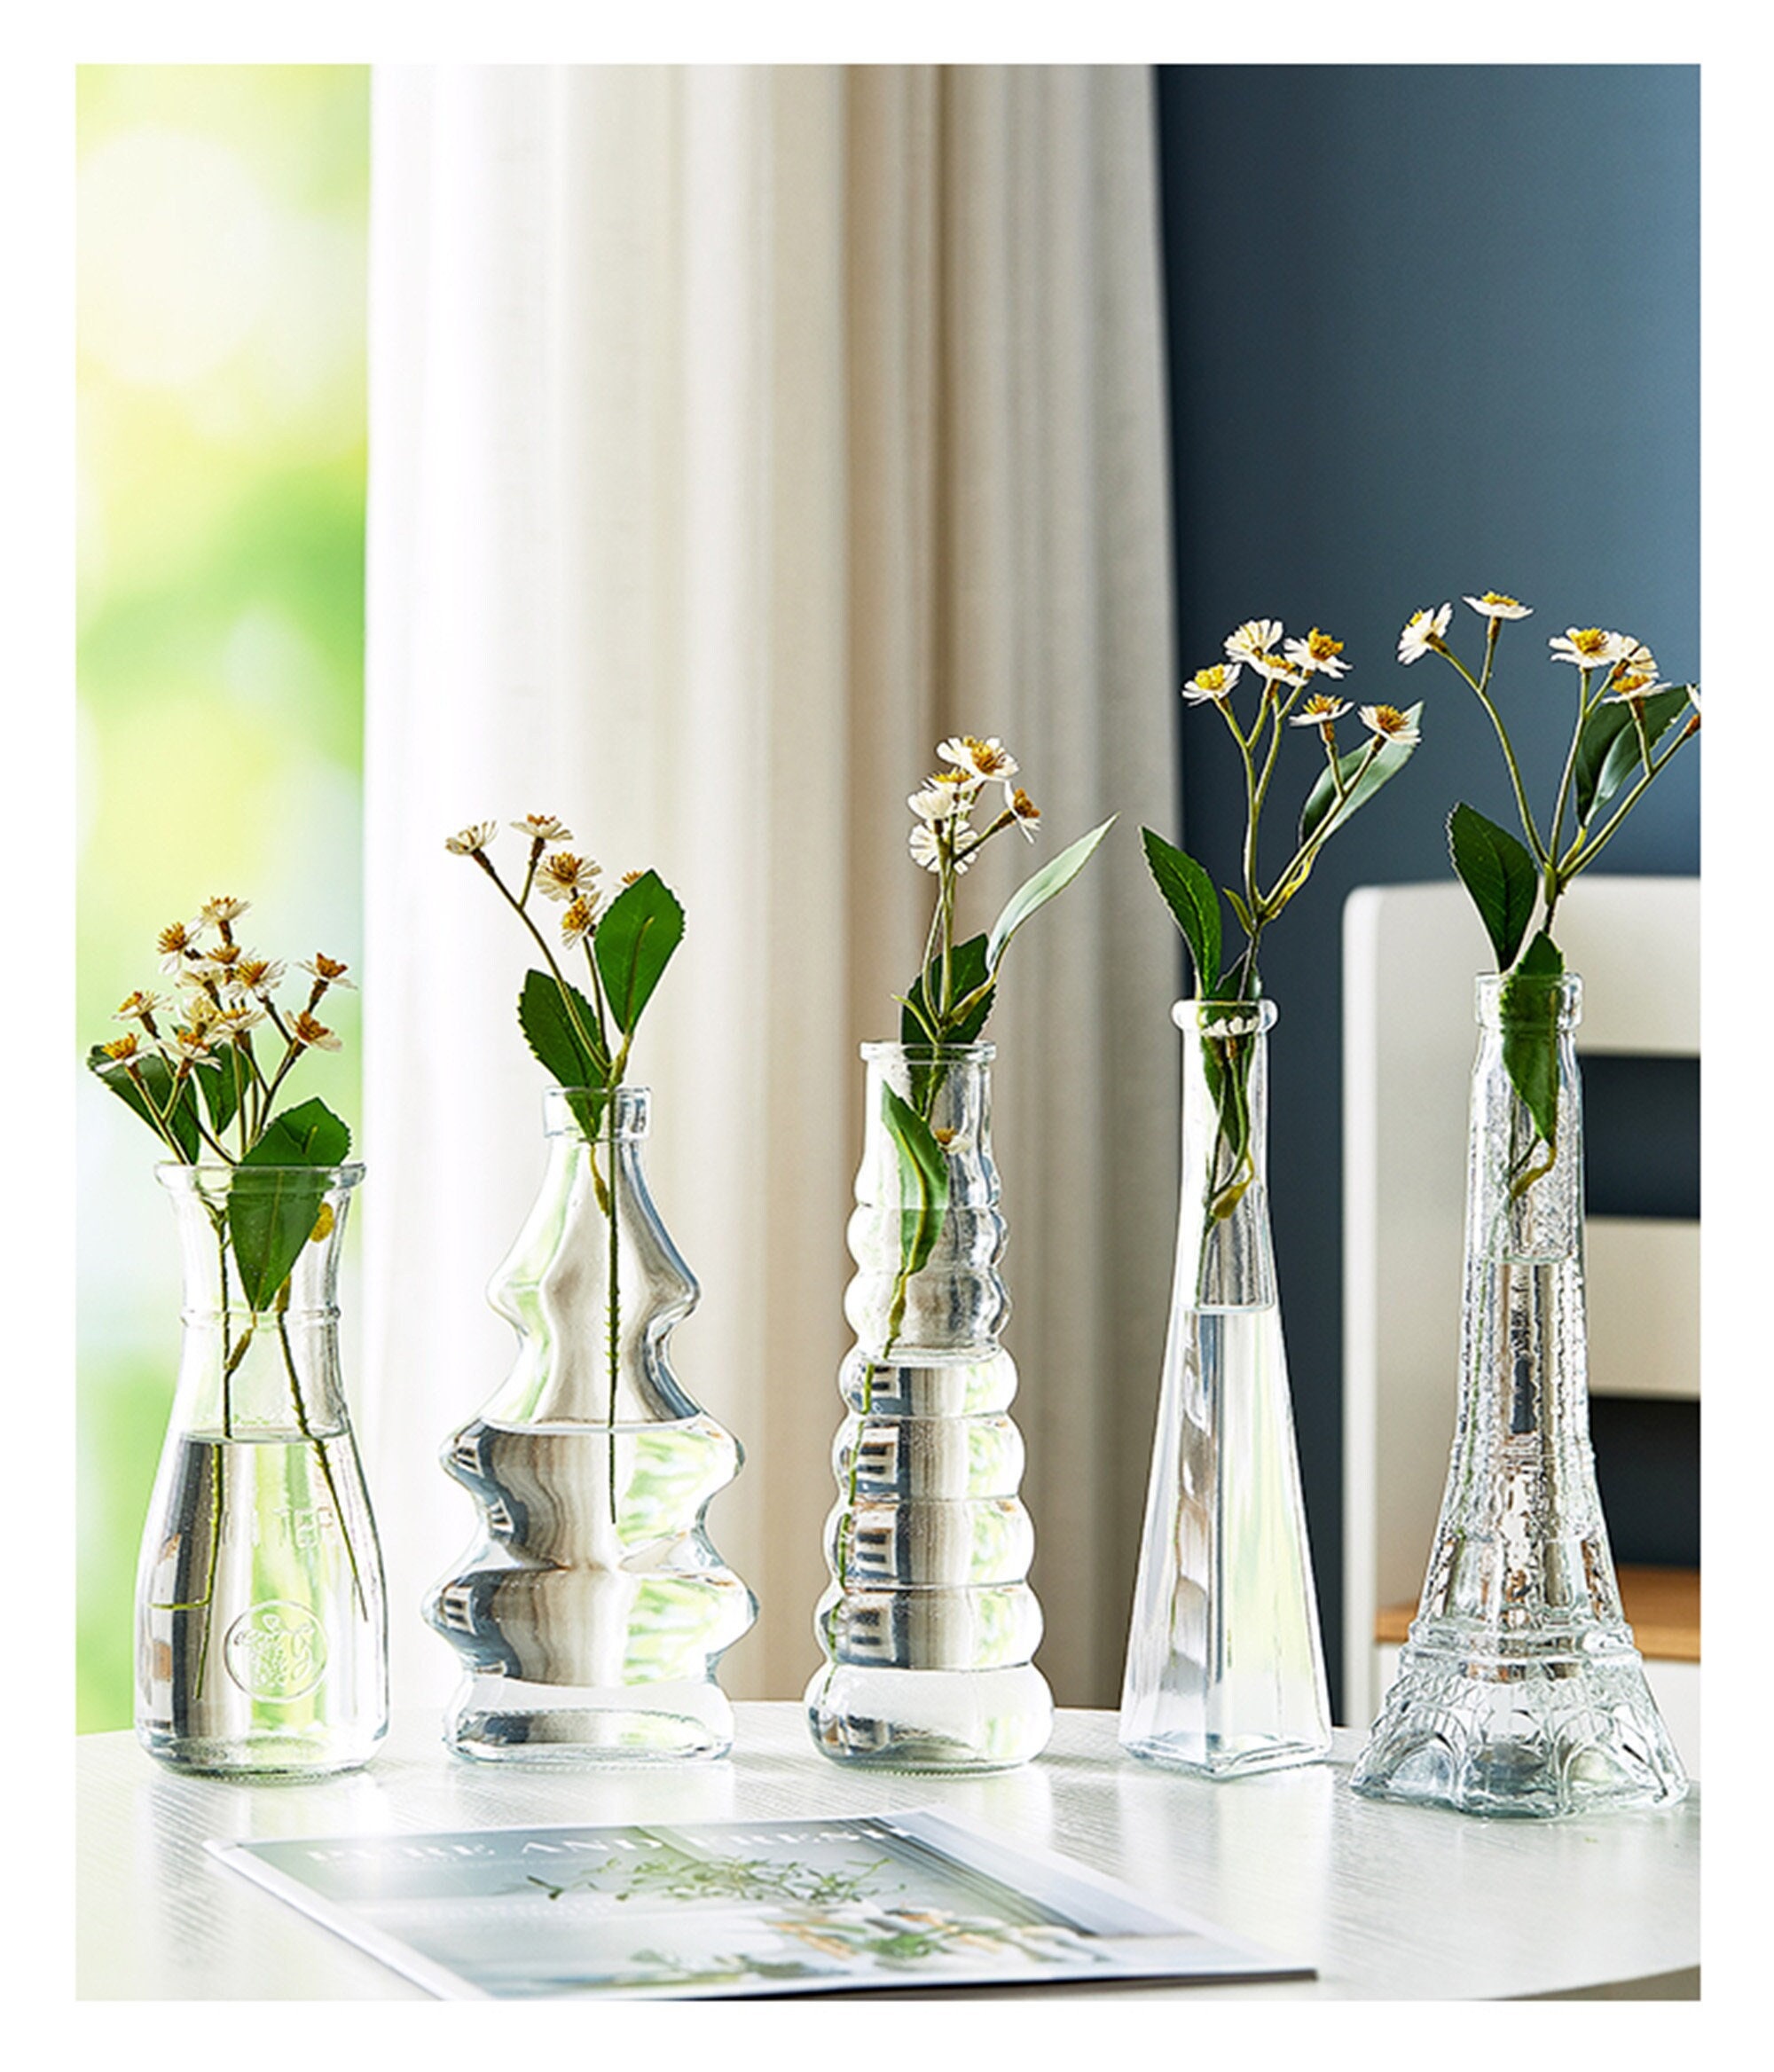 Bud Vases Six Slender Tubes Hinged Metal and Glass Floral Design, Home  Decor, Dining, Weddings, Events, Tablescaping 